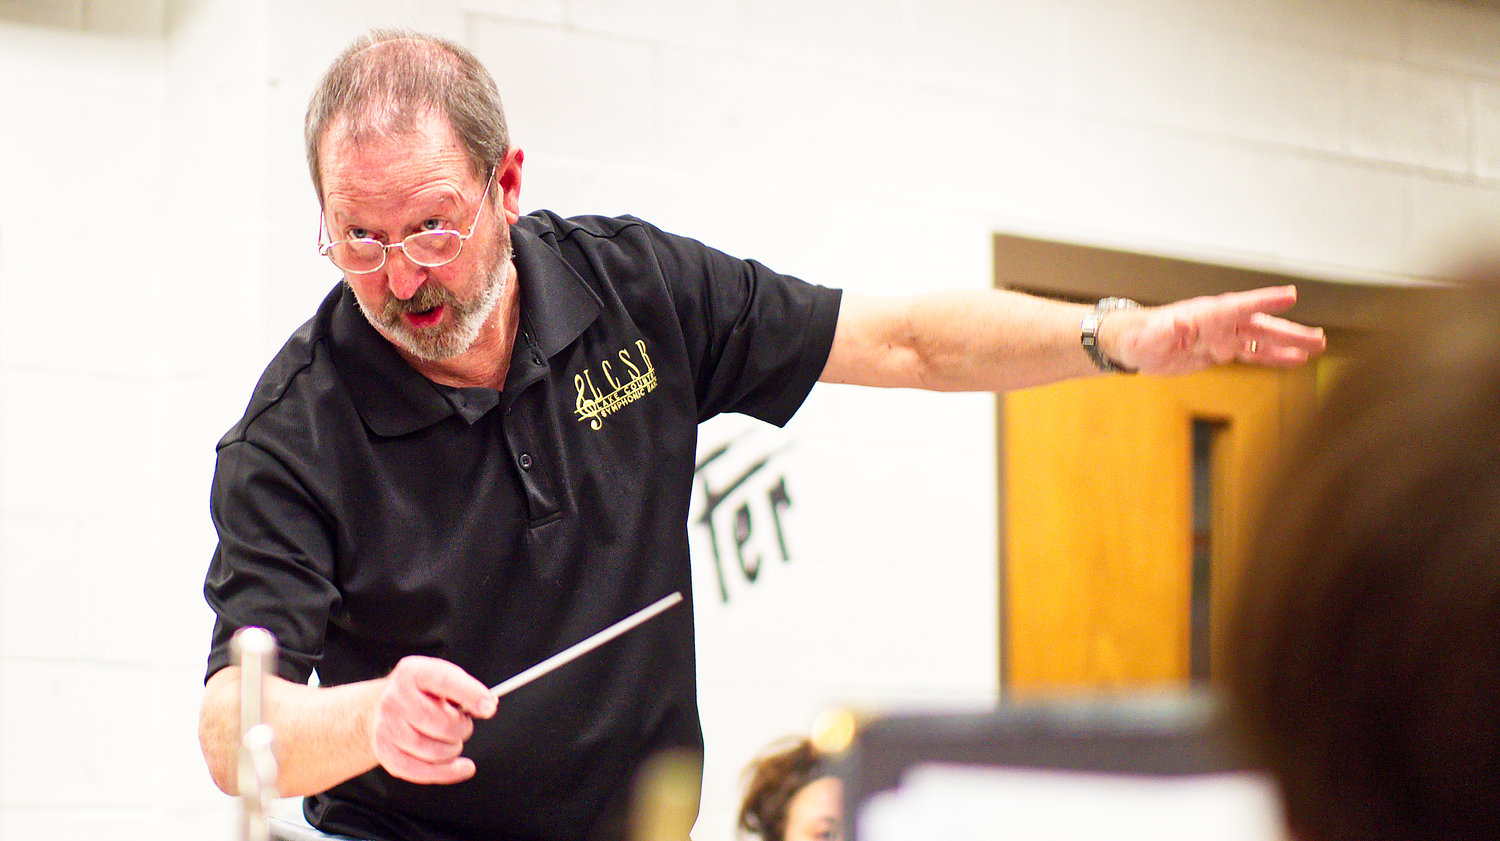 Mike Holbrook conducts rehearsal for the Lake Country Symphonic Band, preparing for his final concerts with the band March 27 and 29.